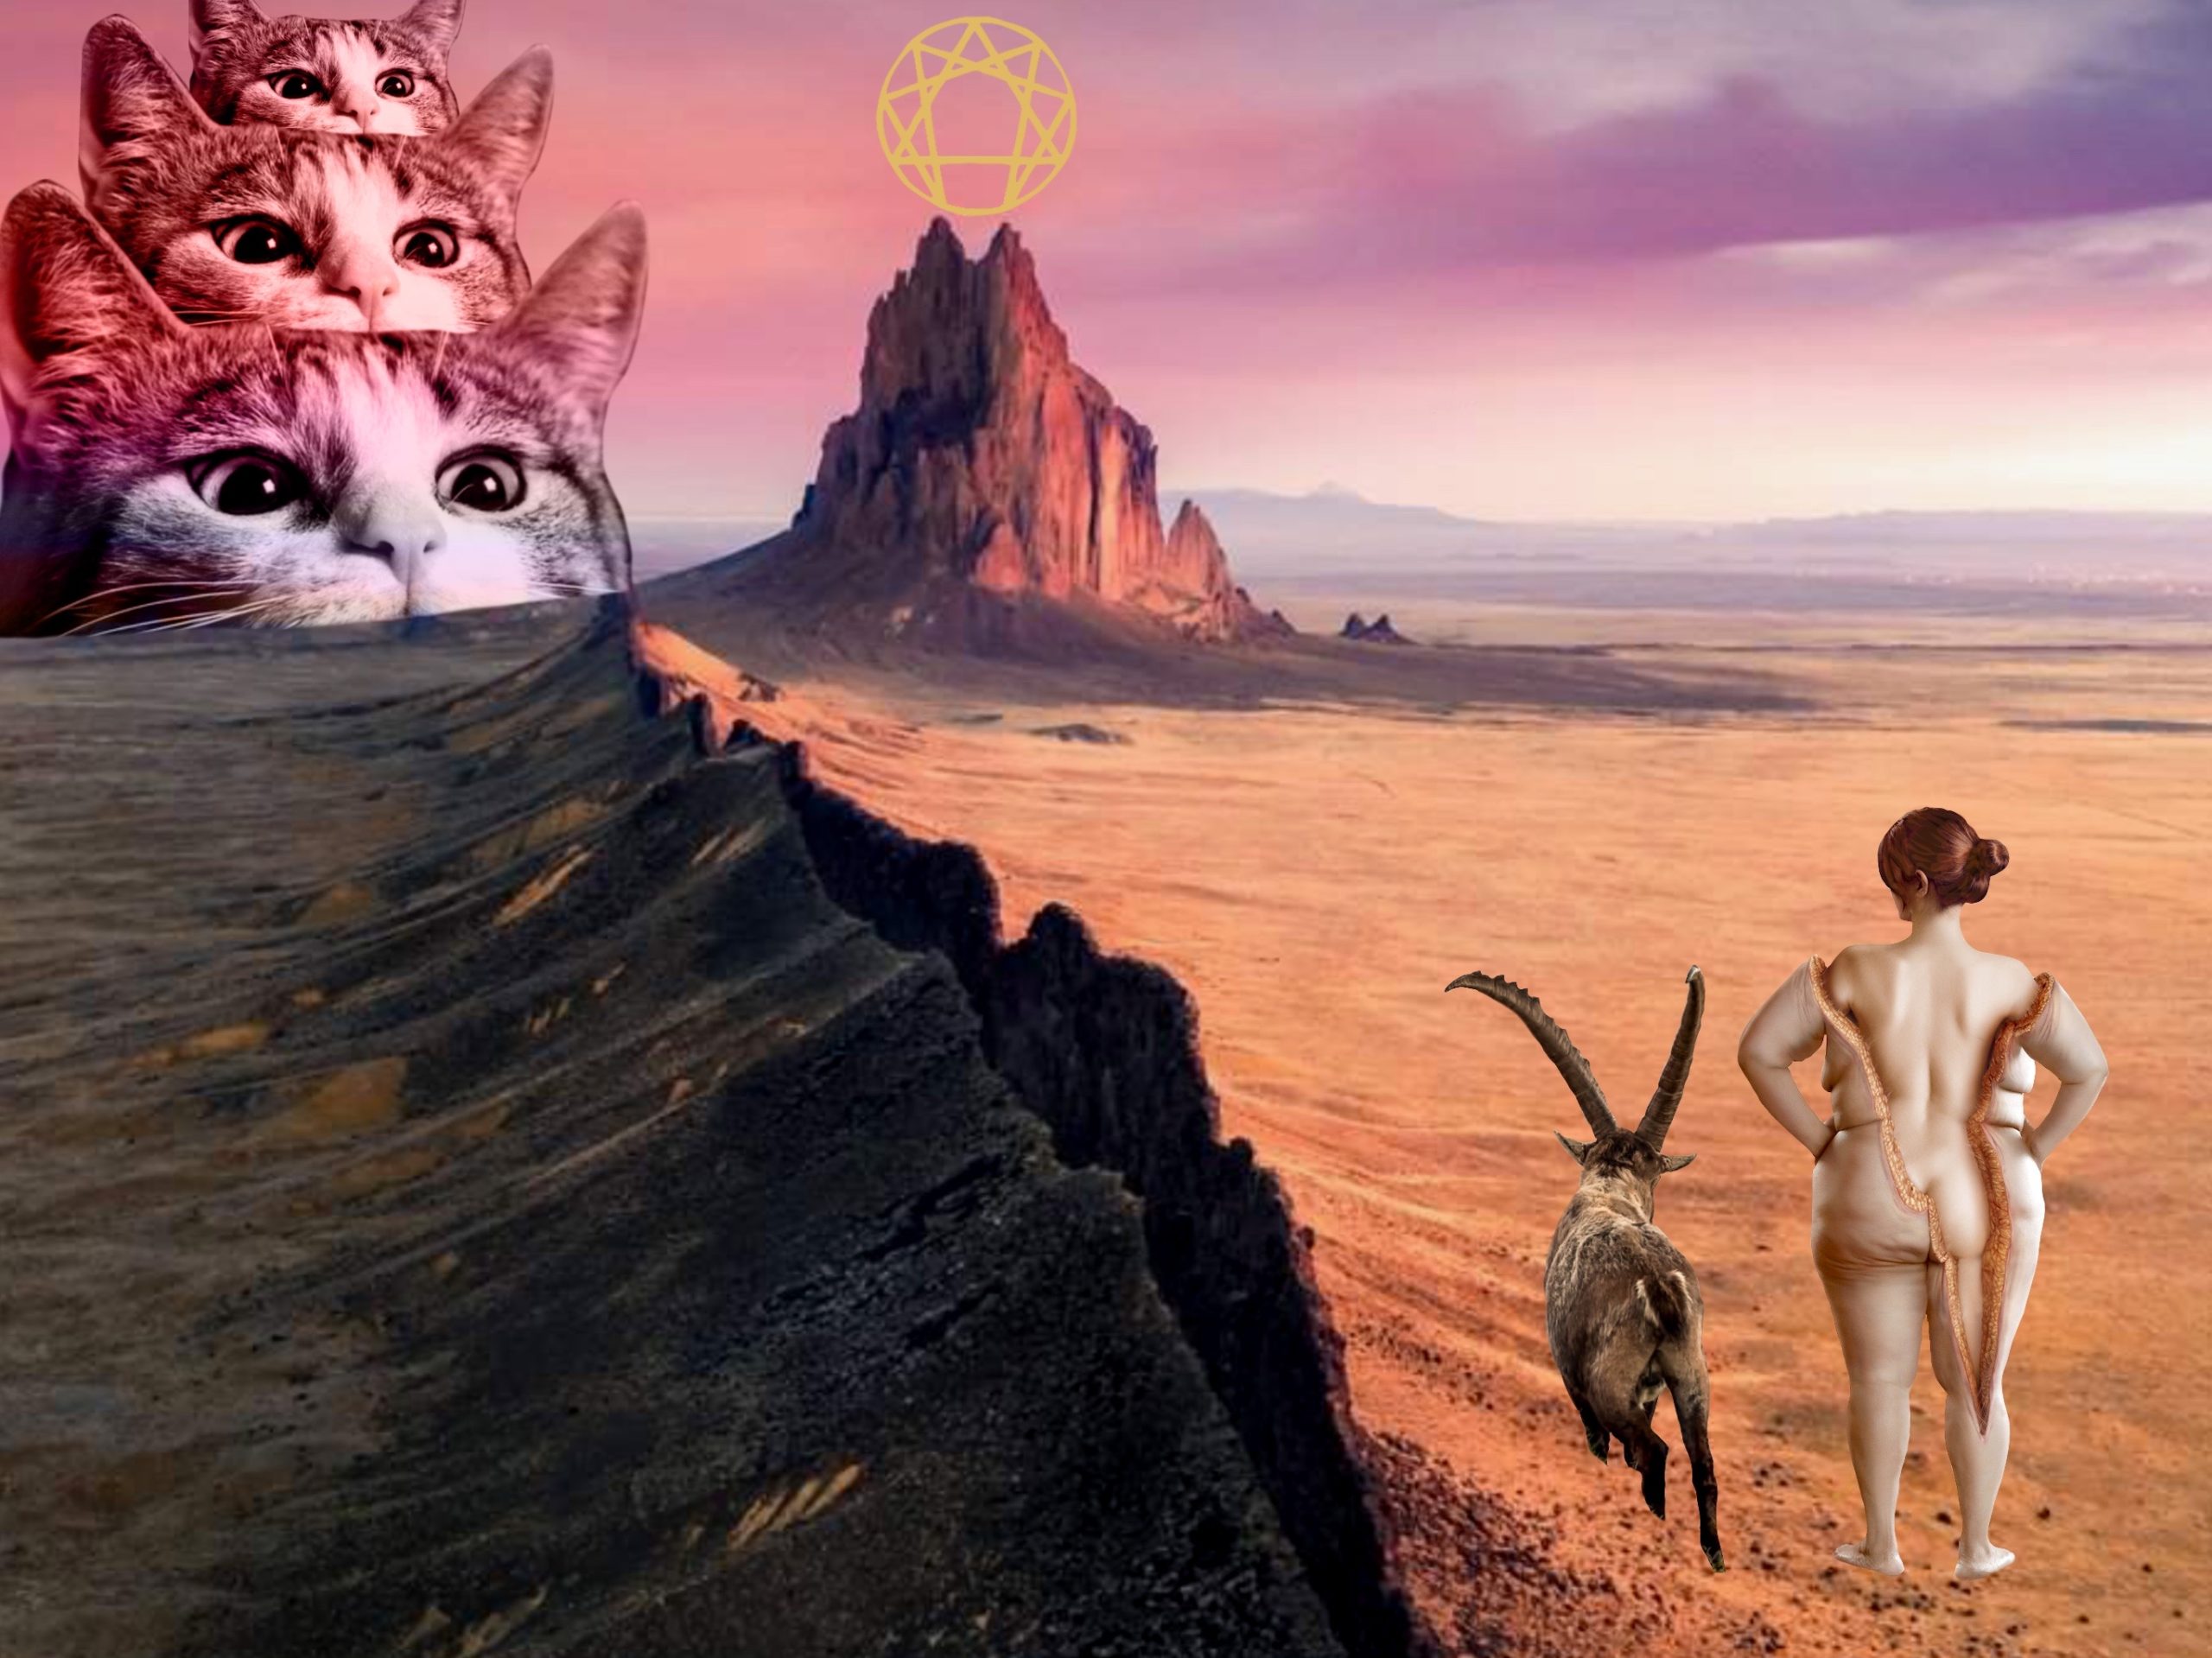 digital collage of woman and ibex in a fantasy desert landscape